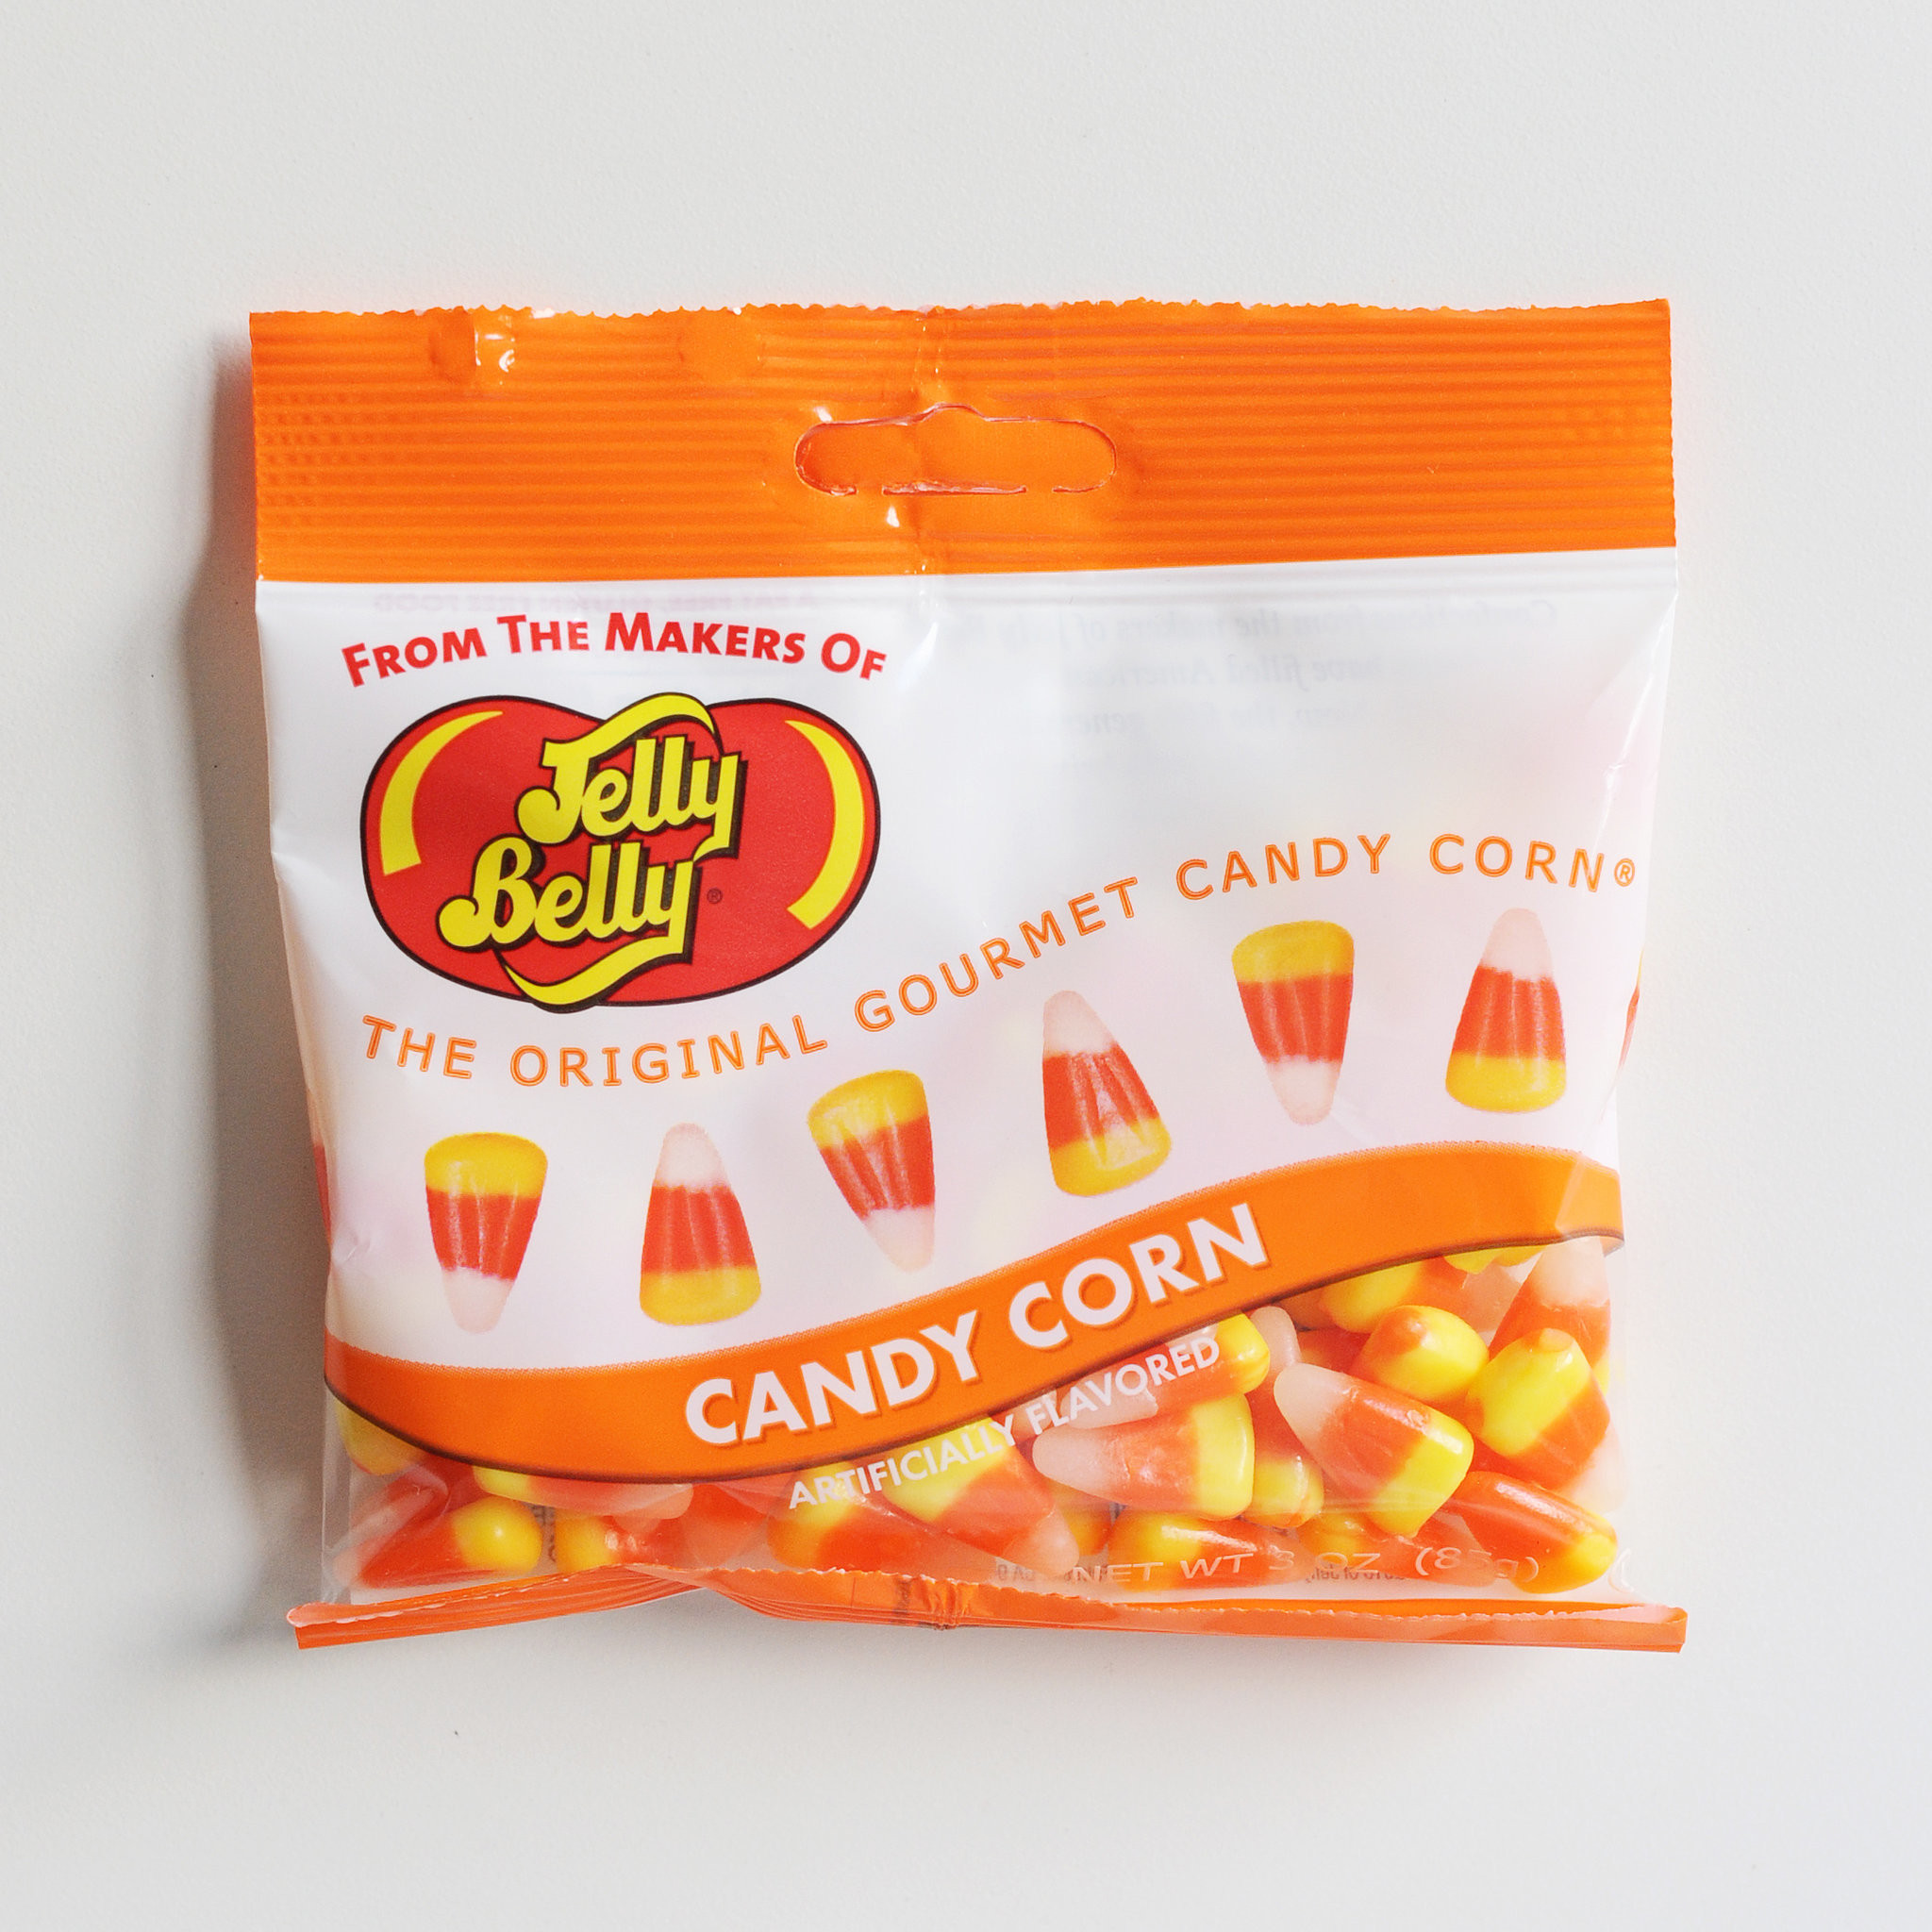 Jelly Belly Candy Corn
 The Best Candy Corn